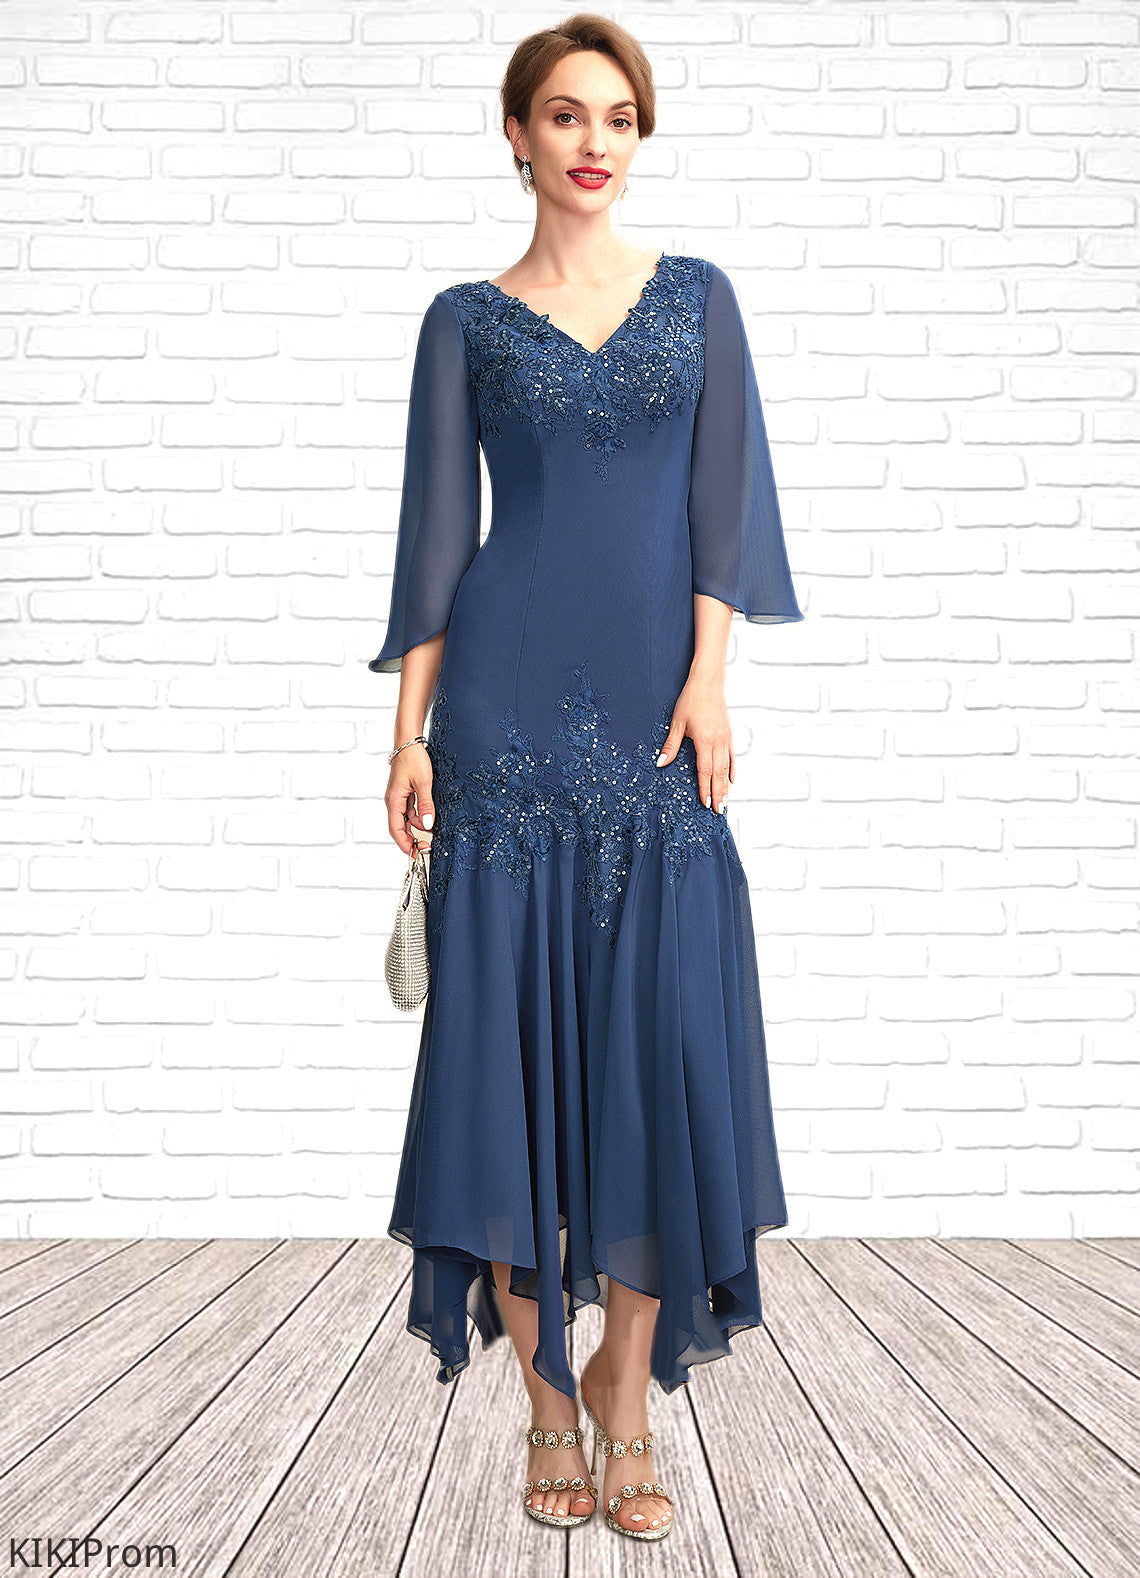 Tabitha Trumpet/Mermaid V-neck Ankle-Length Chiffon Mother of the Bride Dress With Appliques Lace Sequins DZ126P0015009